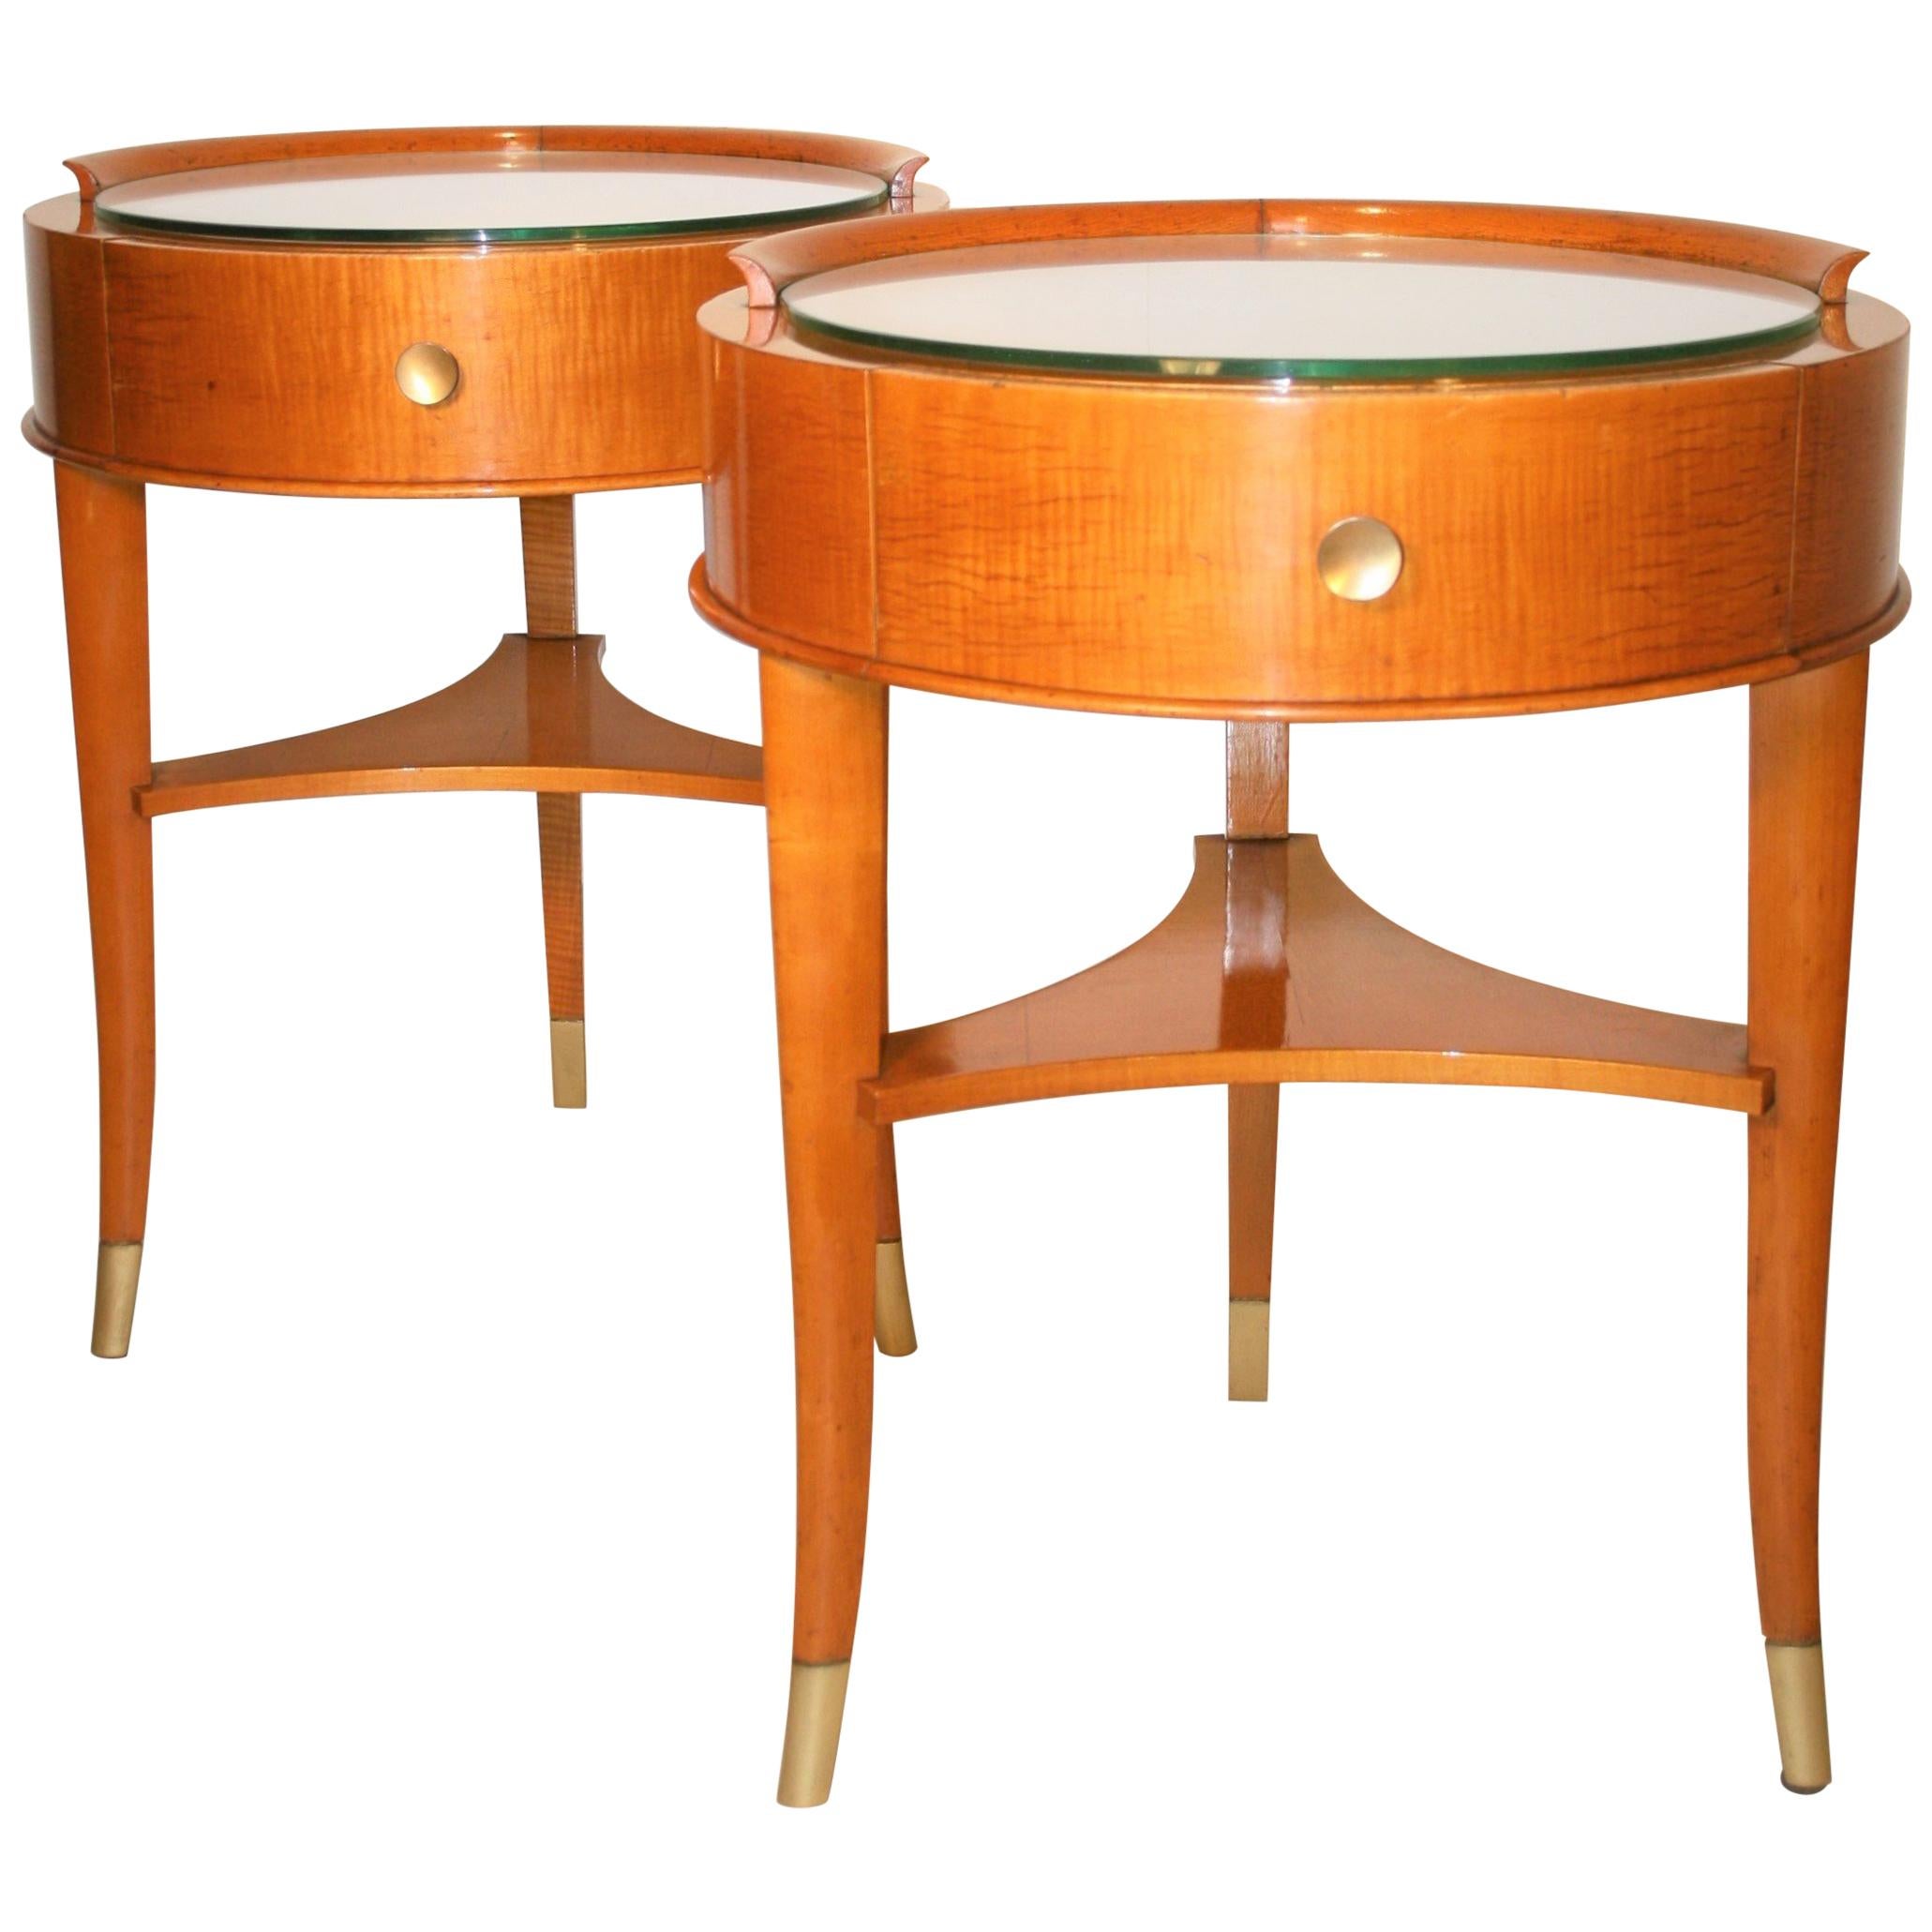 Pair of Signed De Coene Side Tables, 1930s